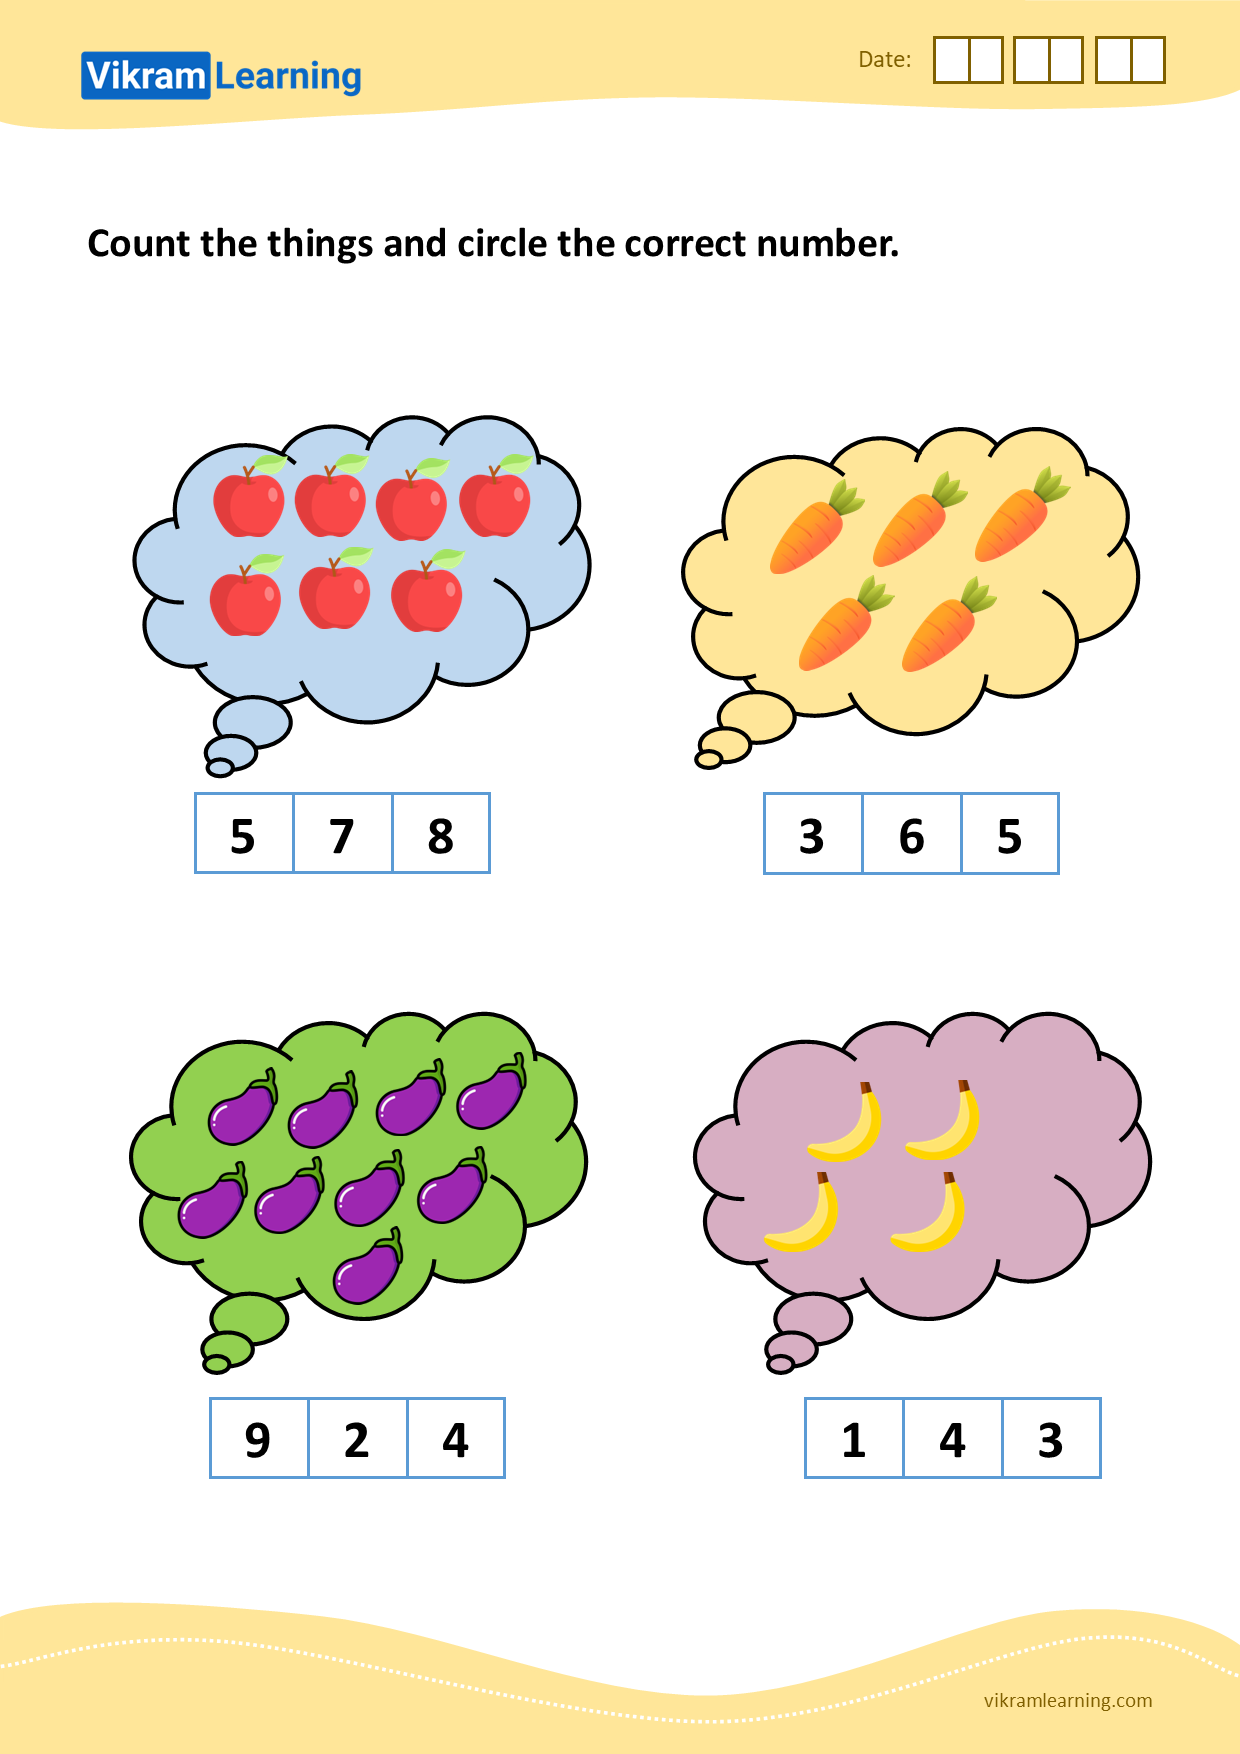 Download count the things and circle the correct number worksheets